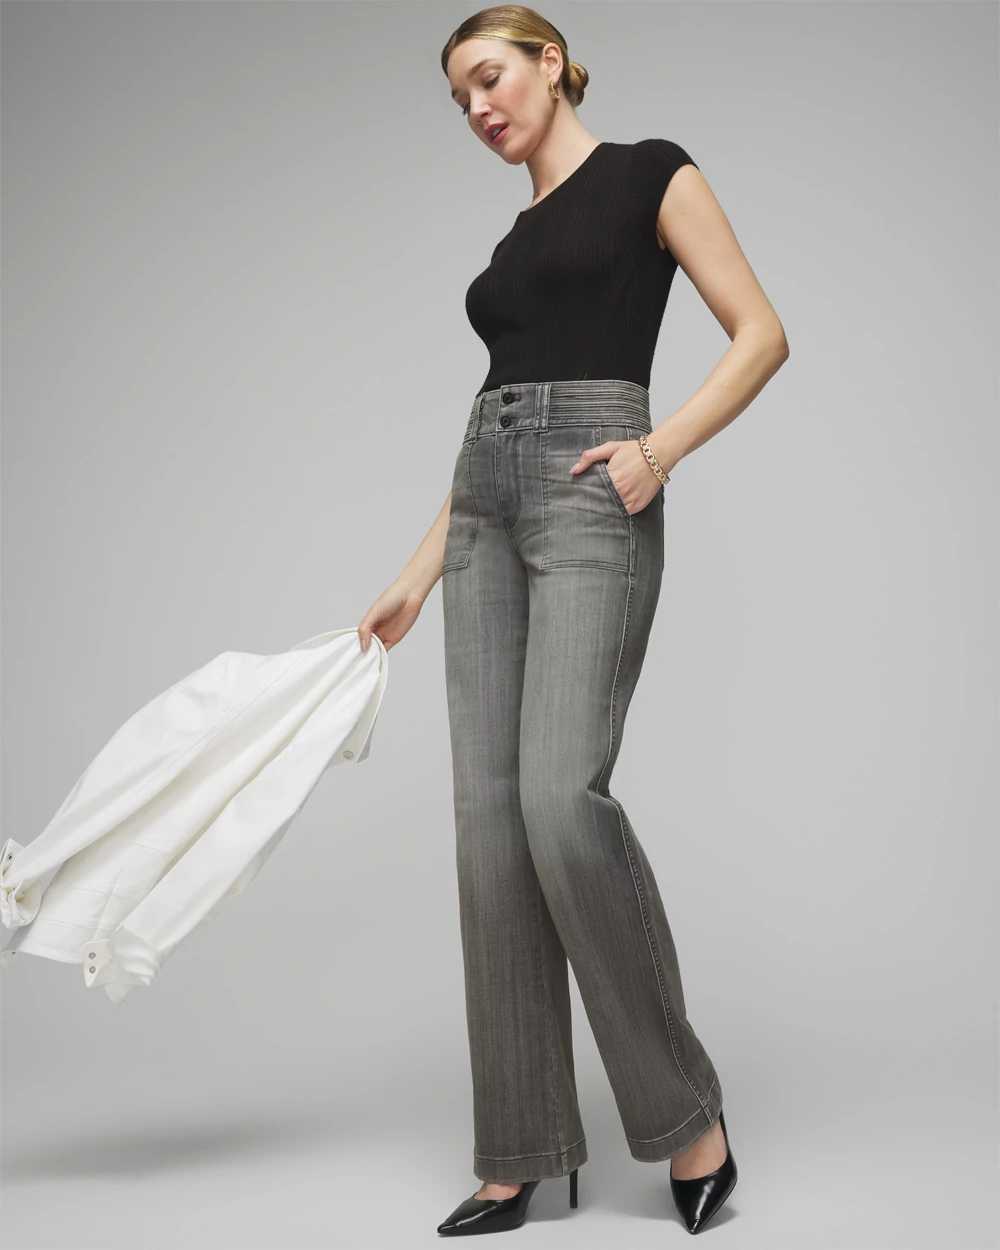 Extra High-Rise Everyday Soft Novelty Waistband Trouser click to view larger image.